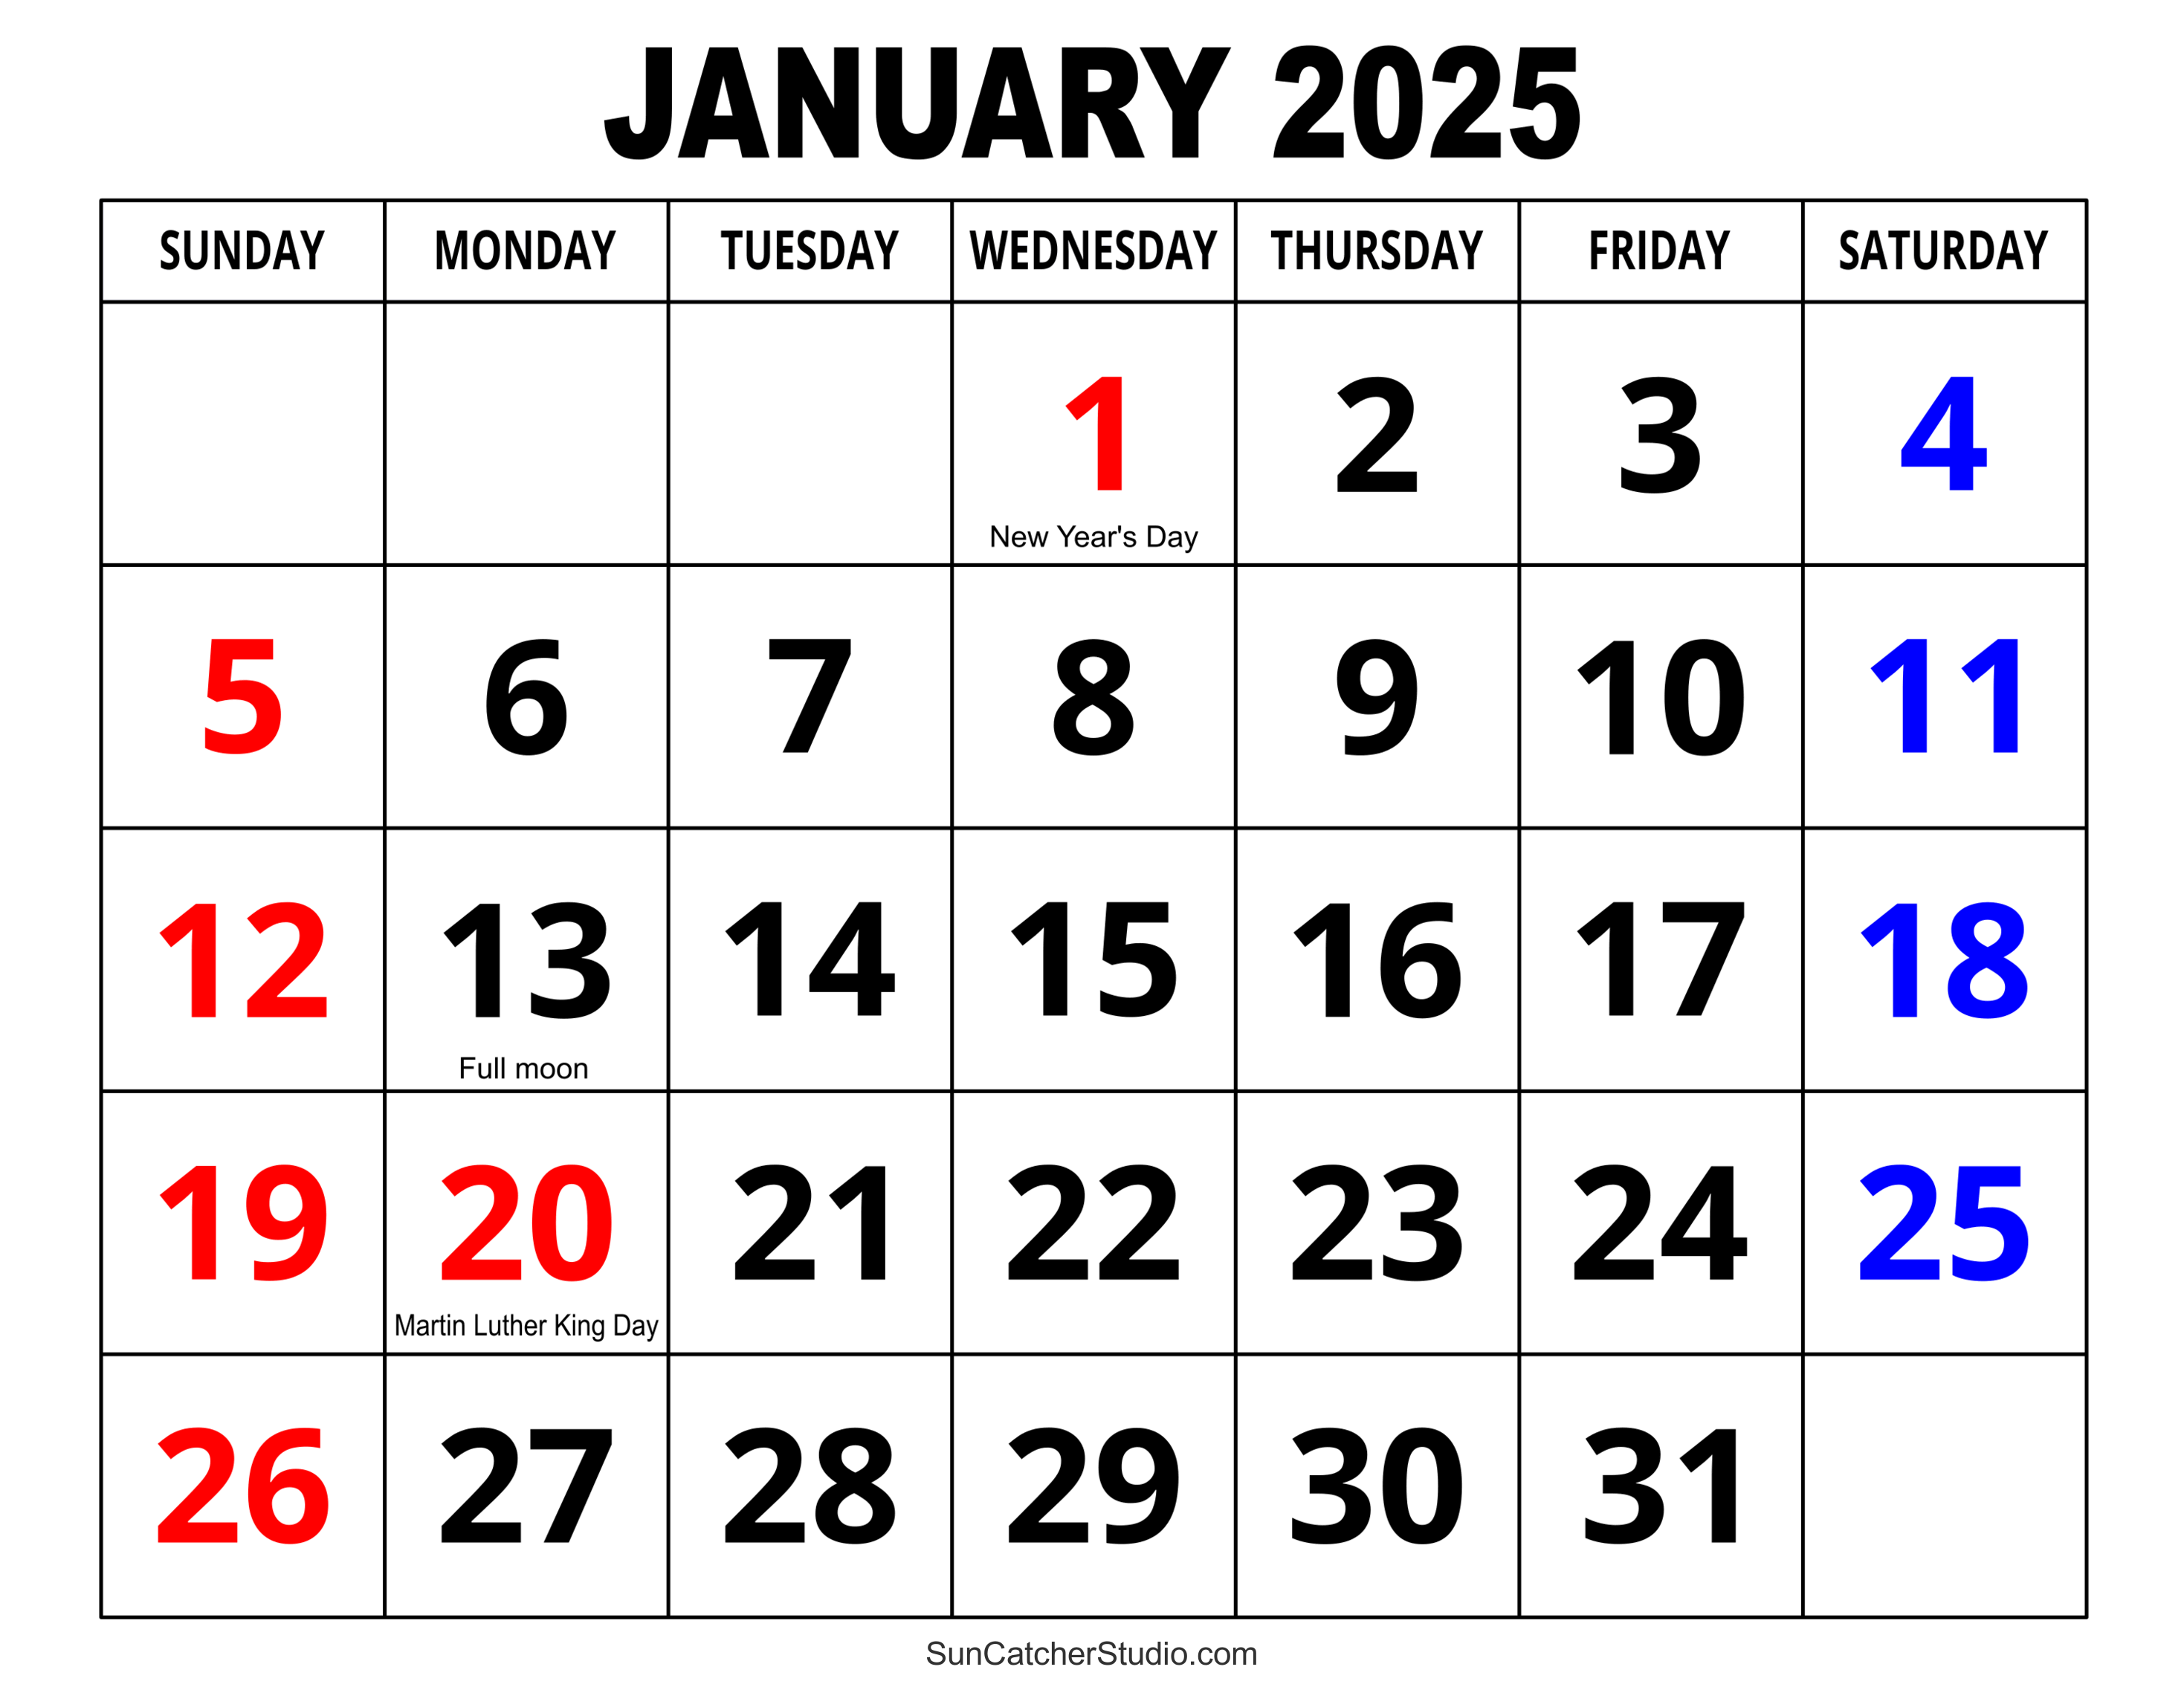 January 2025 Calendar (Free Printable) DIY Projects, Patterns